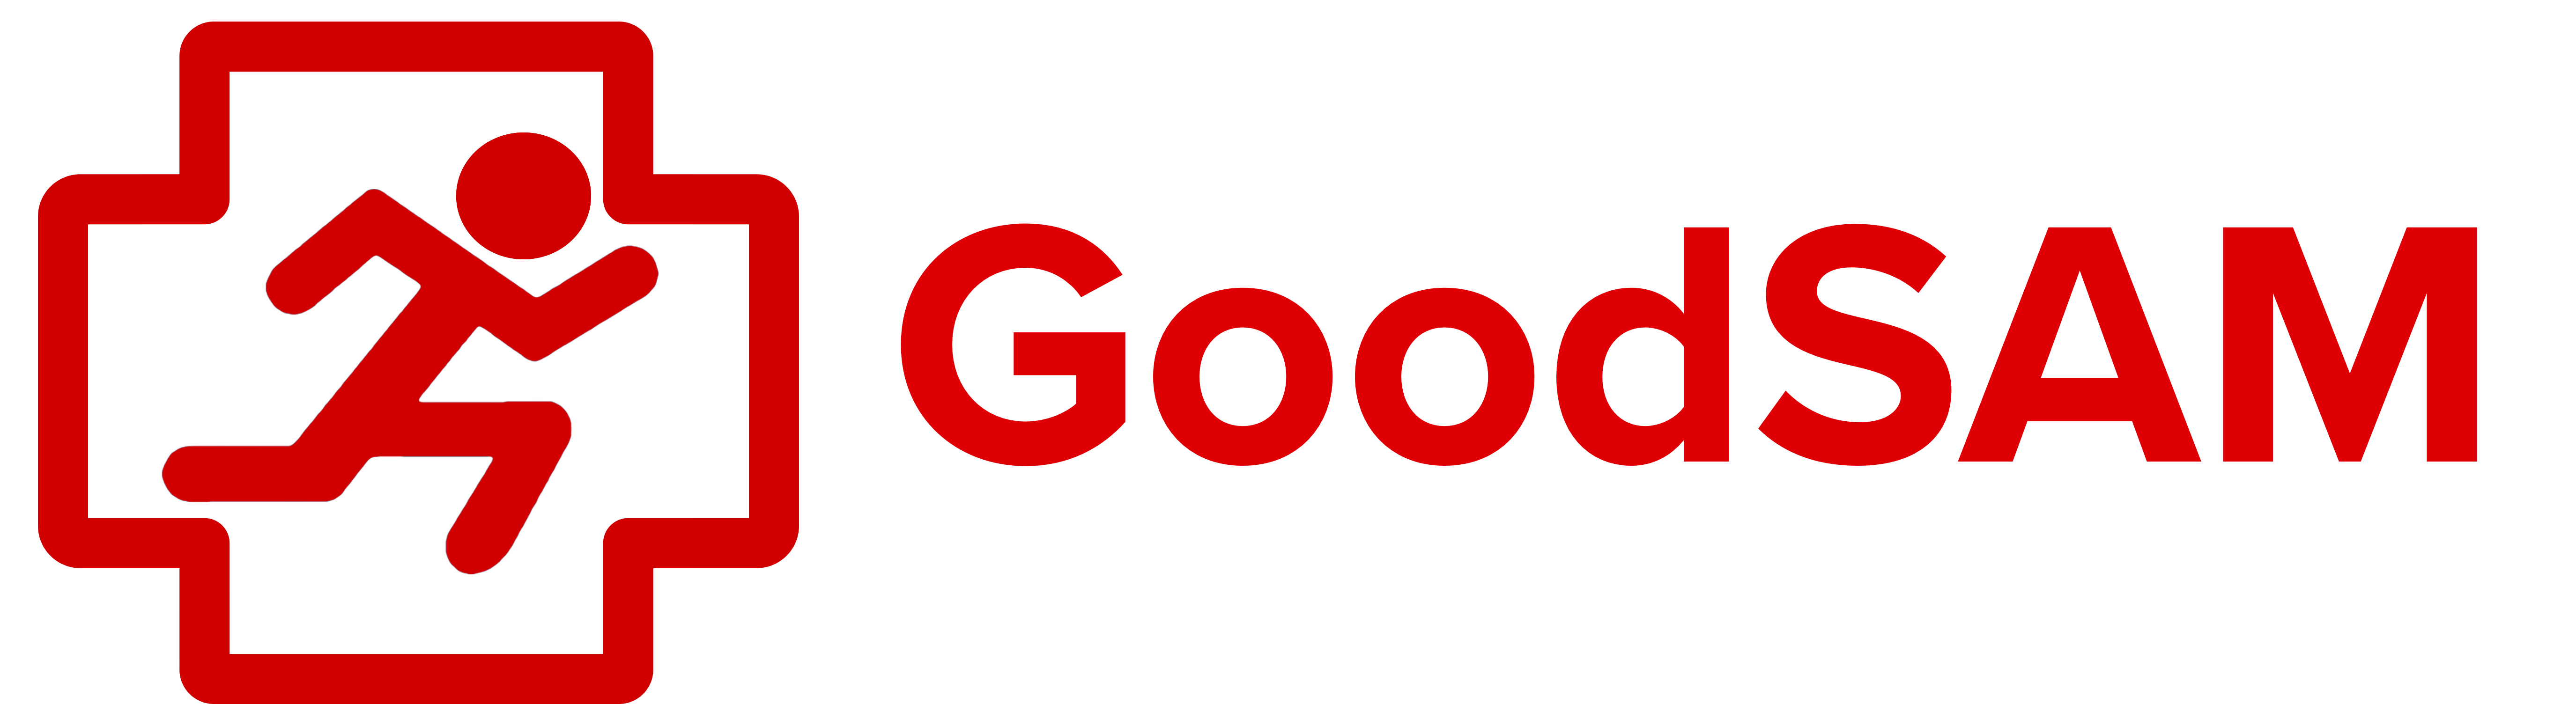 Good Sam logo, red. Square with a running stick man and text reads: Good Sam.